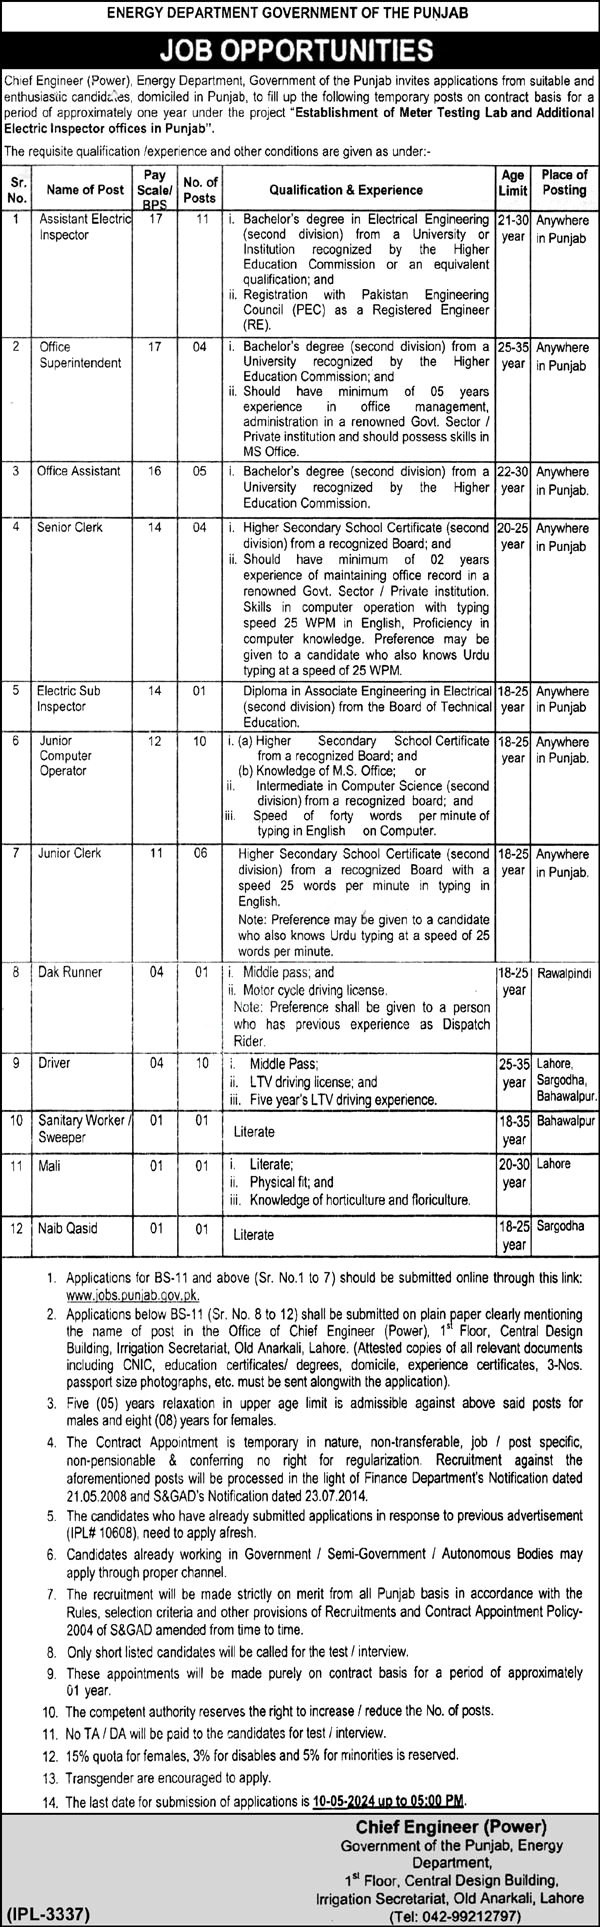 Energy Department Jobs in Punjab for Matric, Inter, and Graduates